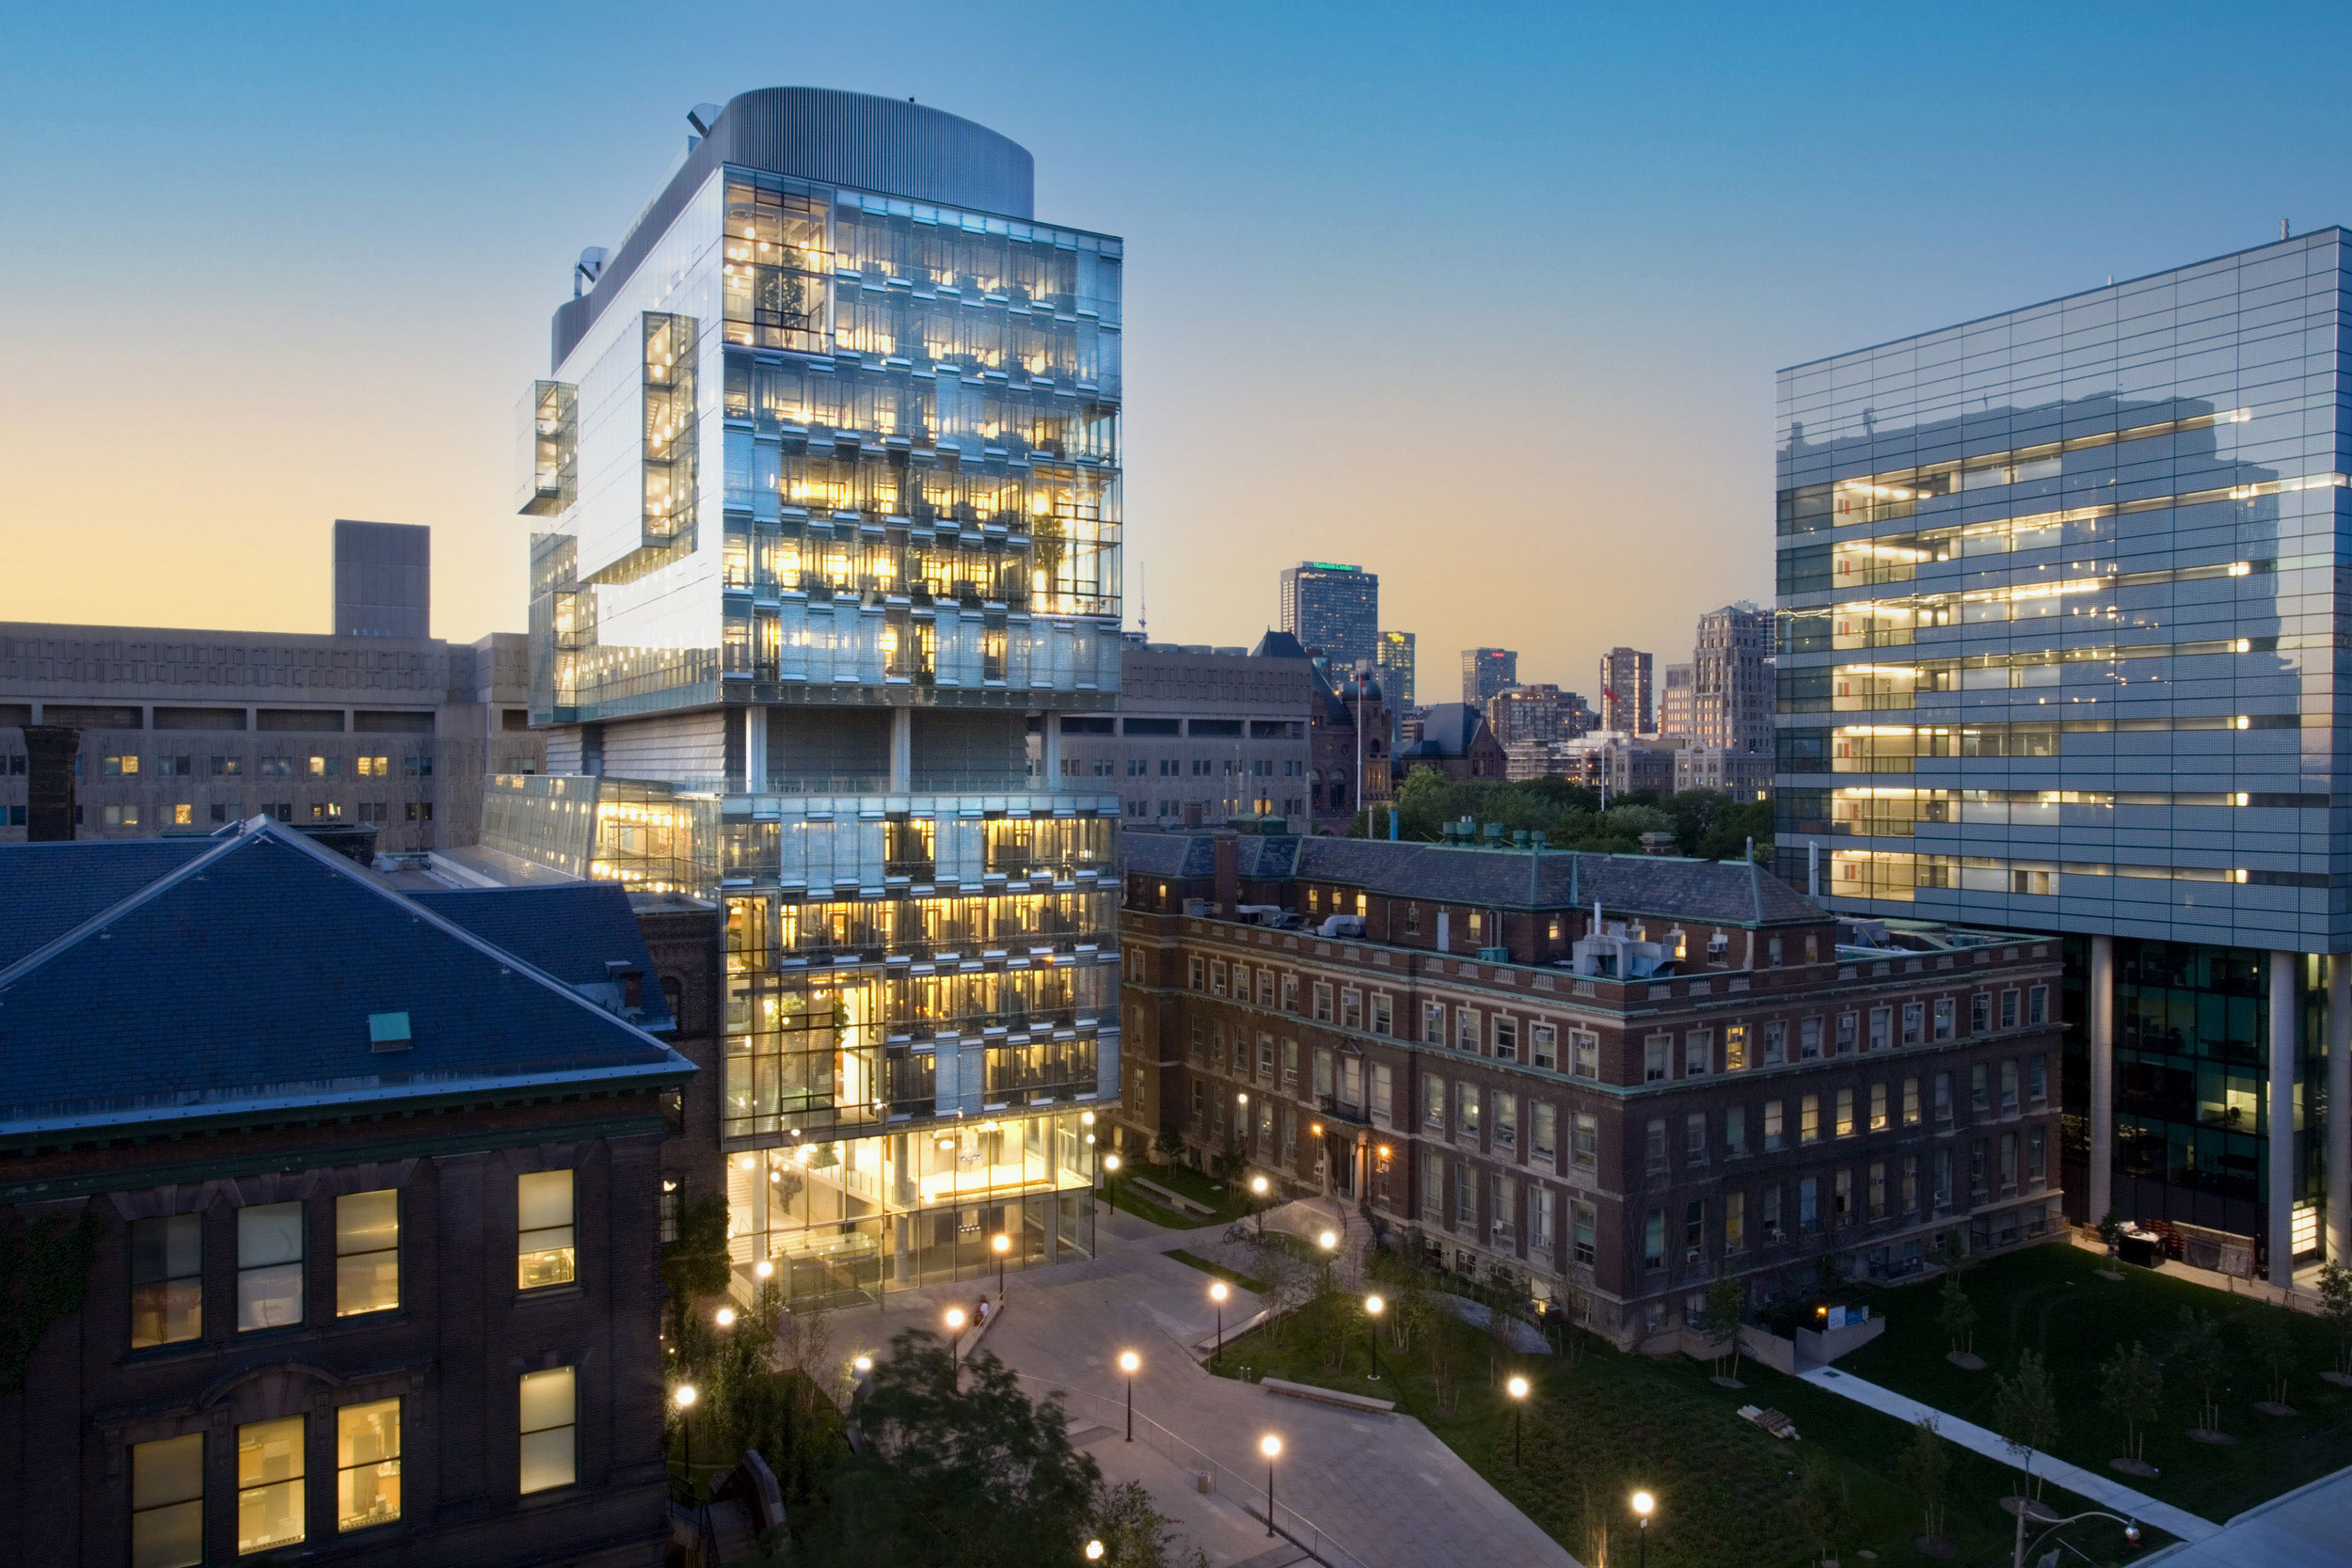 Twilight photo of skycraper of the Terrence Donnelly Centre